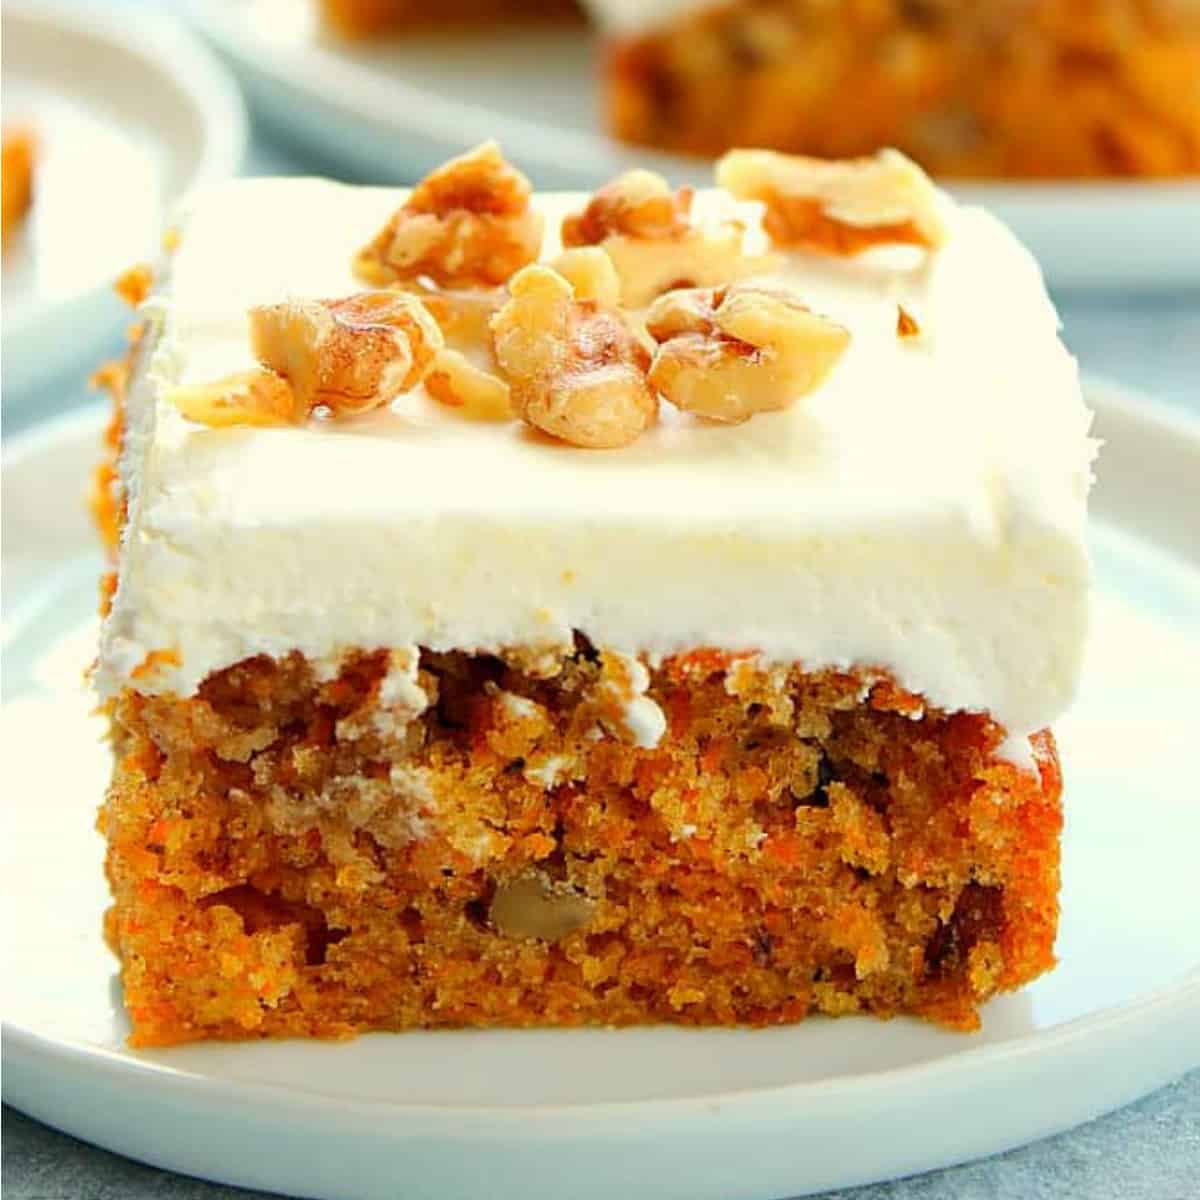 Piece of carrot cake on a plate.